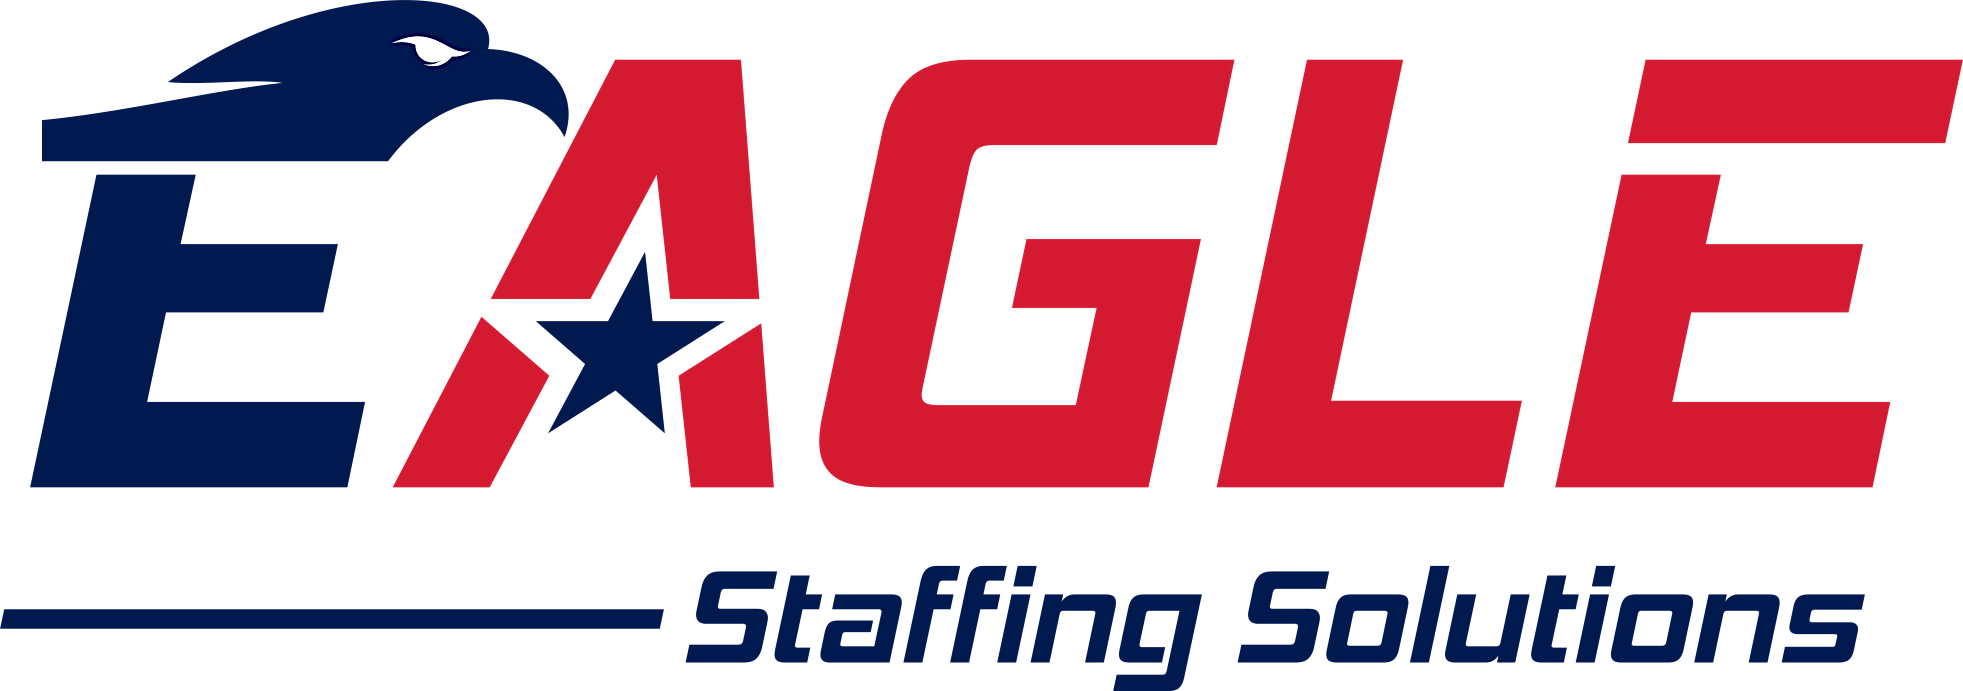 Eagle Staffing Solutions